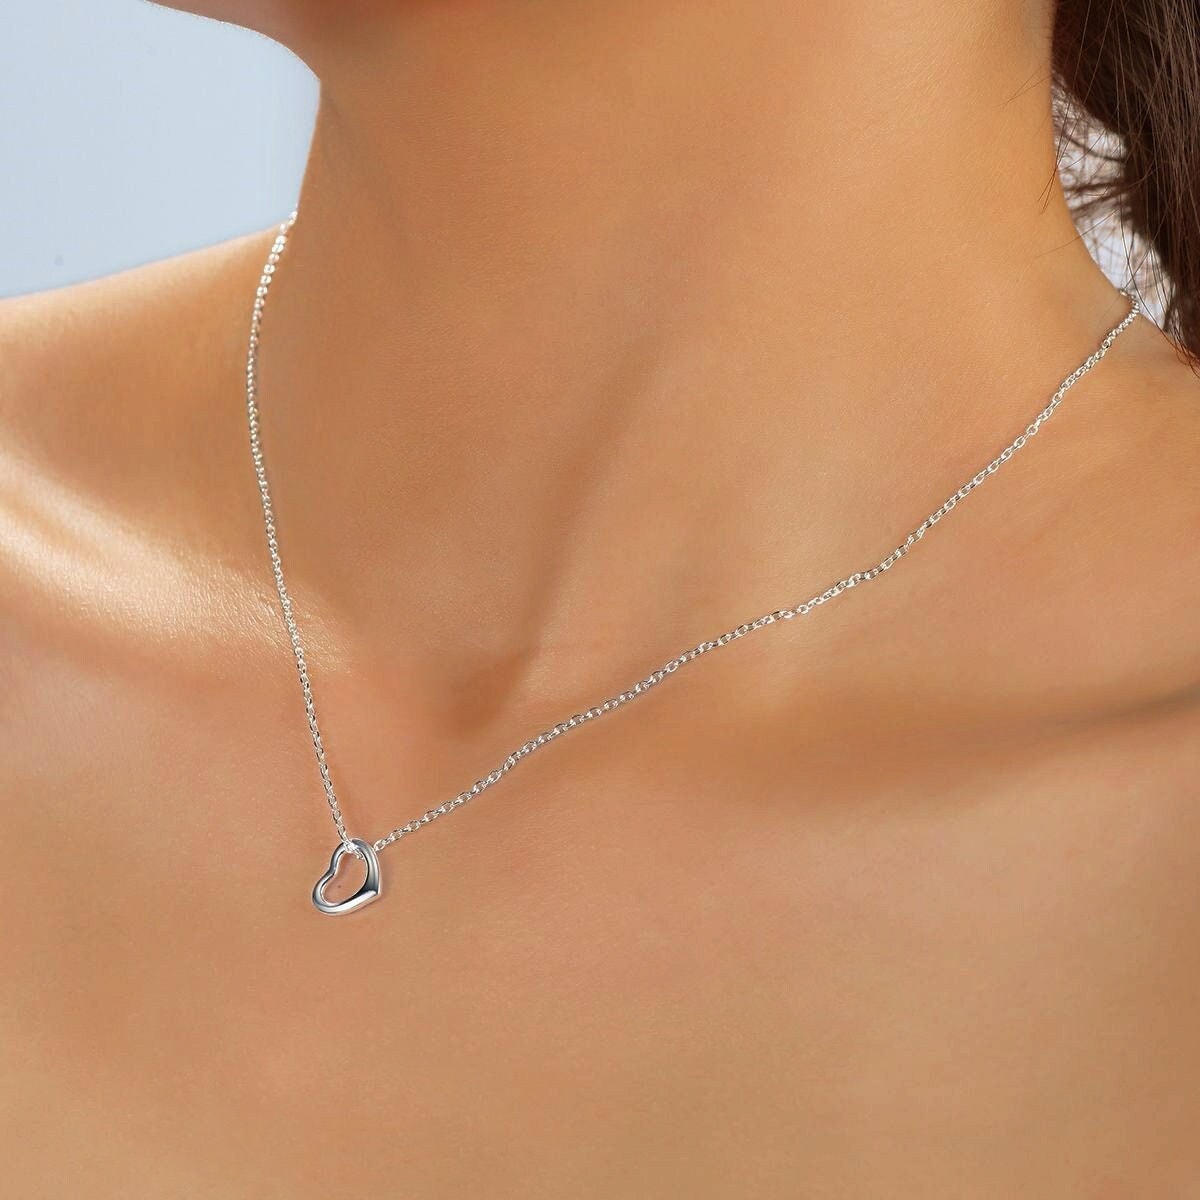 Becky - Dainty Silver/Rose Gold Layering Necklace, 925 Sterling Silver 18K Rose Gold plated, dainty Open heart necklace